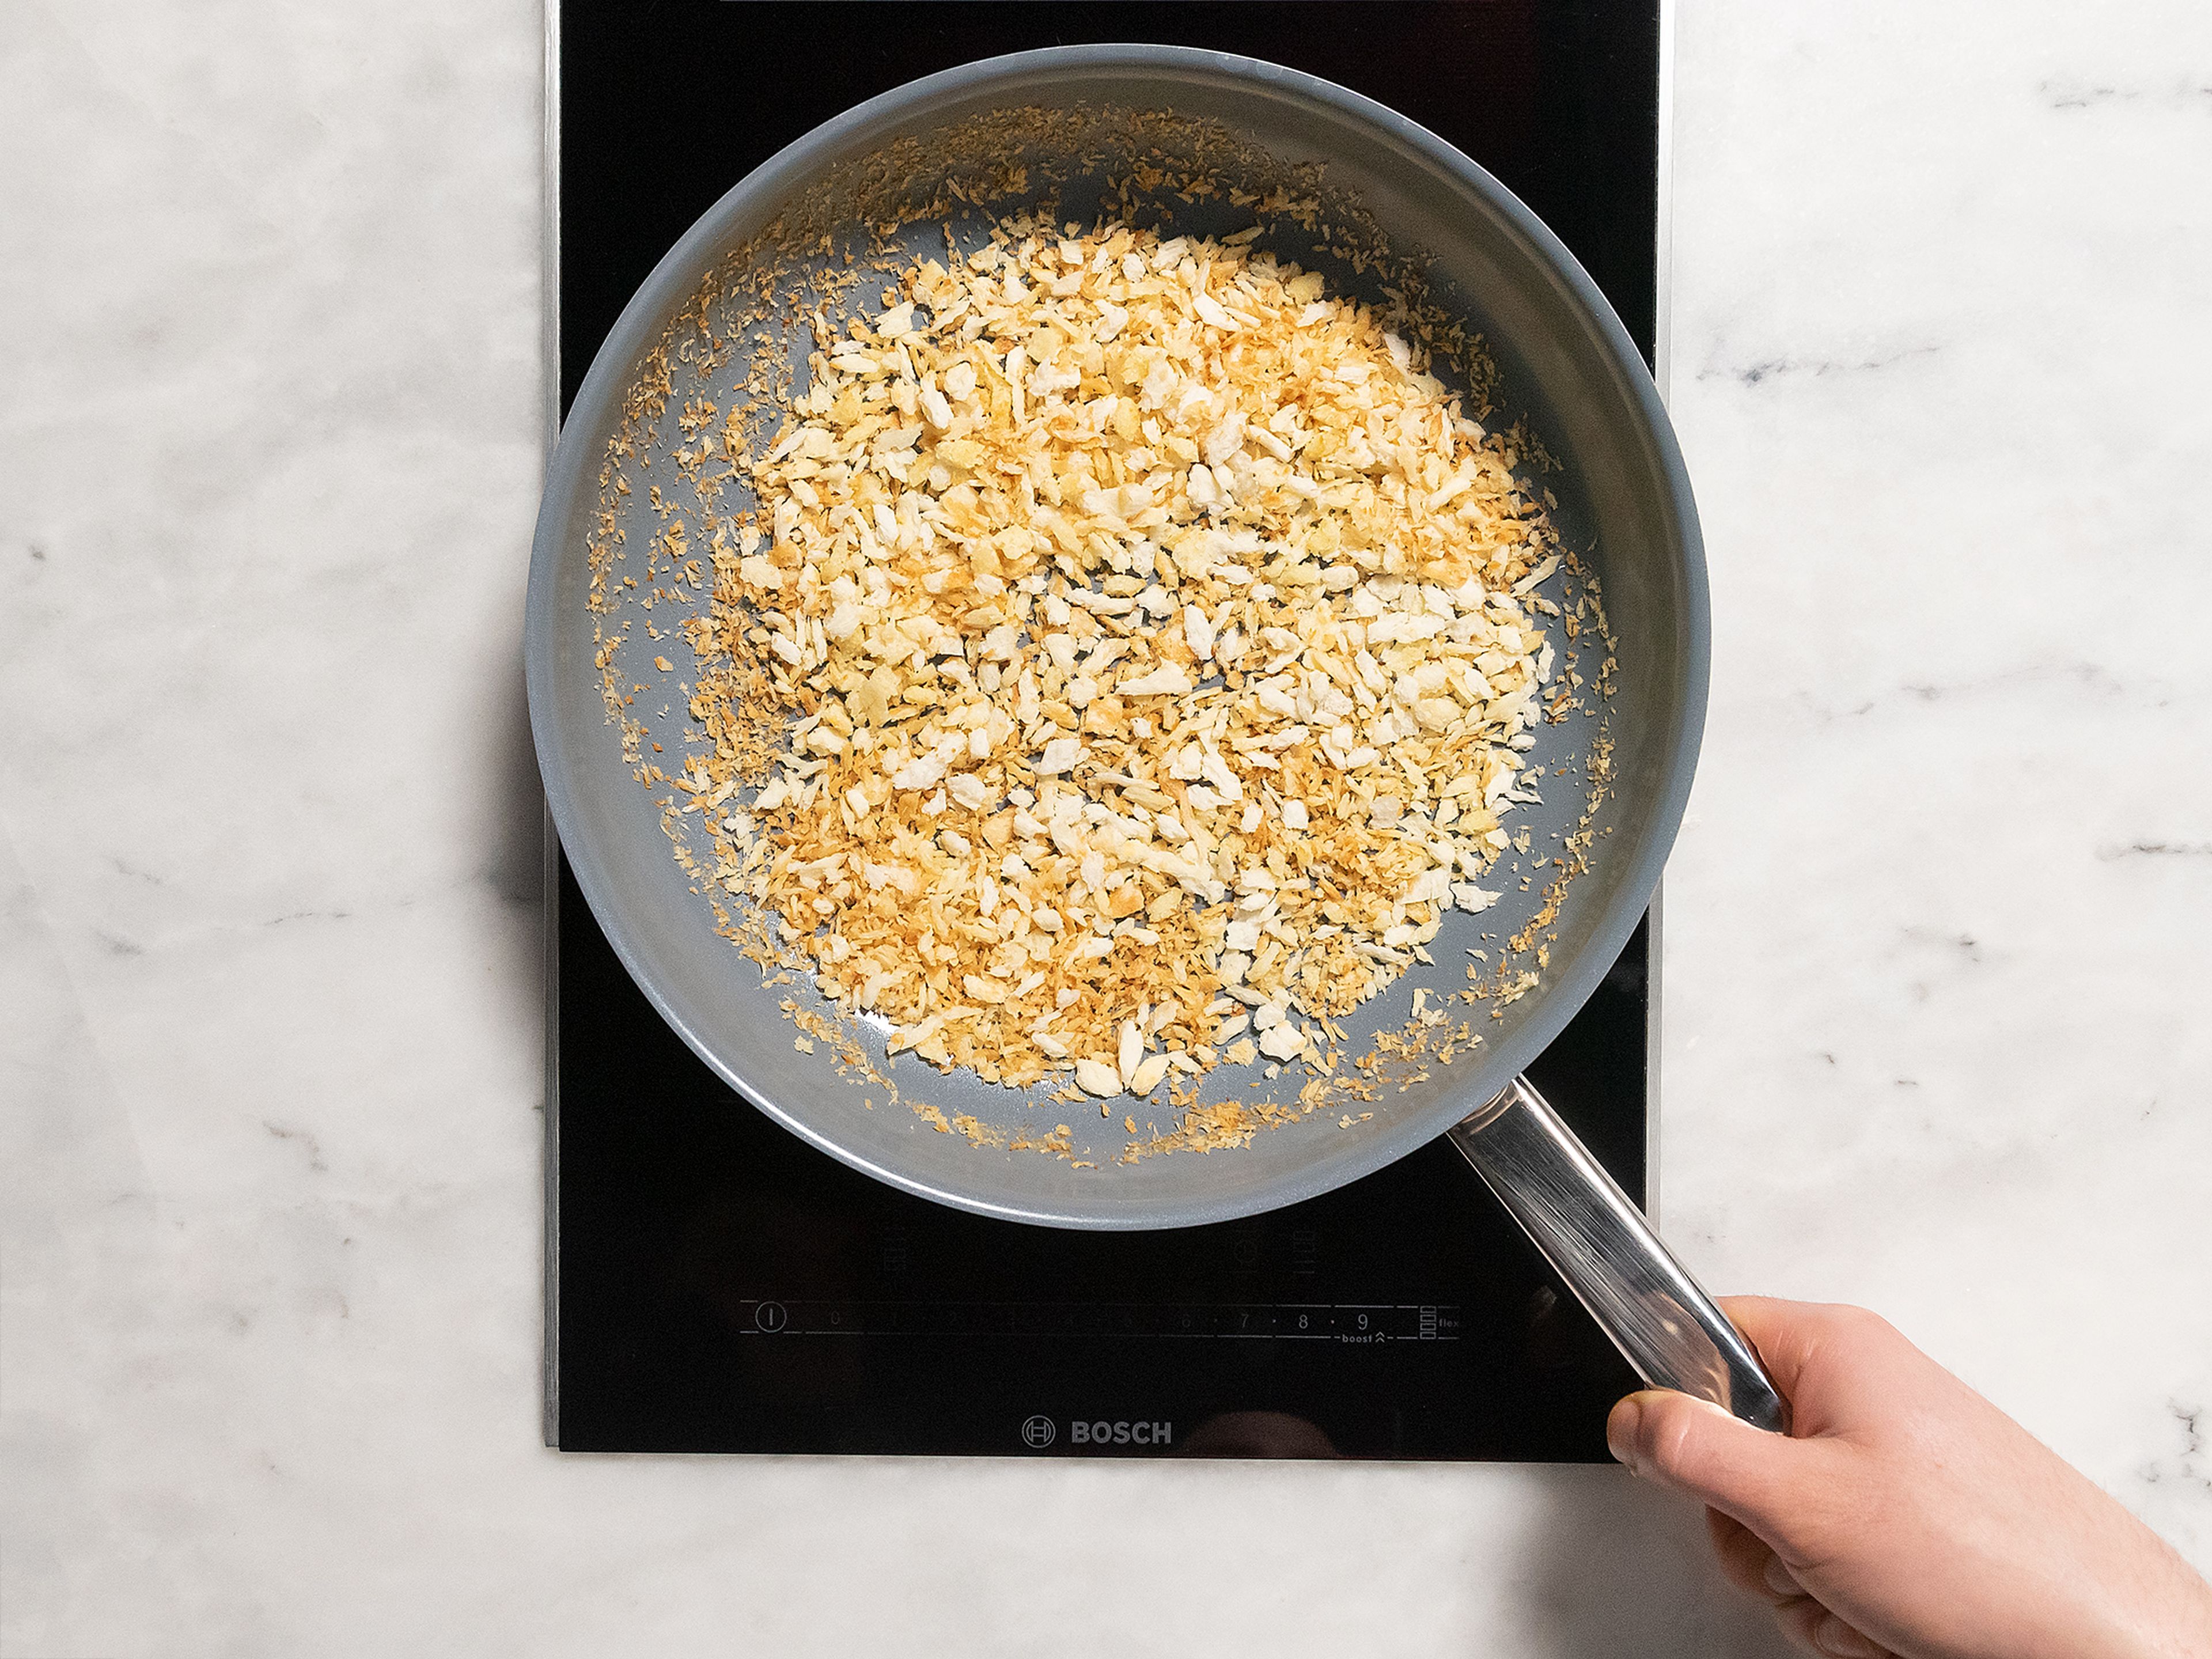 Heat a large frying pan with half the olive oil over medium-high heat. Toast the panko until crunchy and brown. Remove panko from heat and set aside.